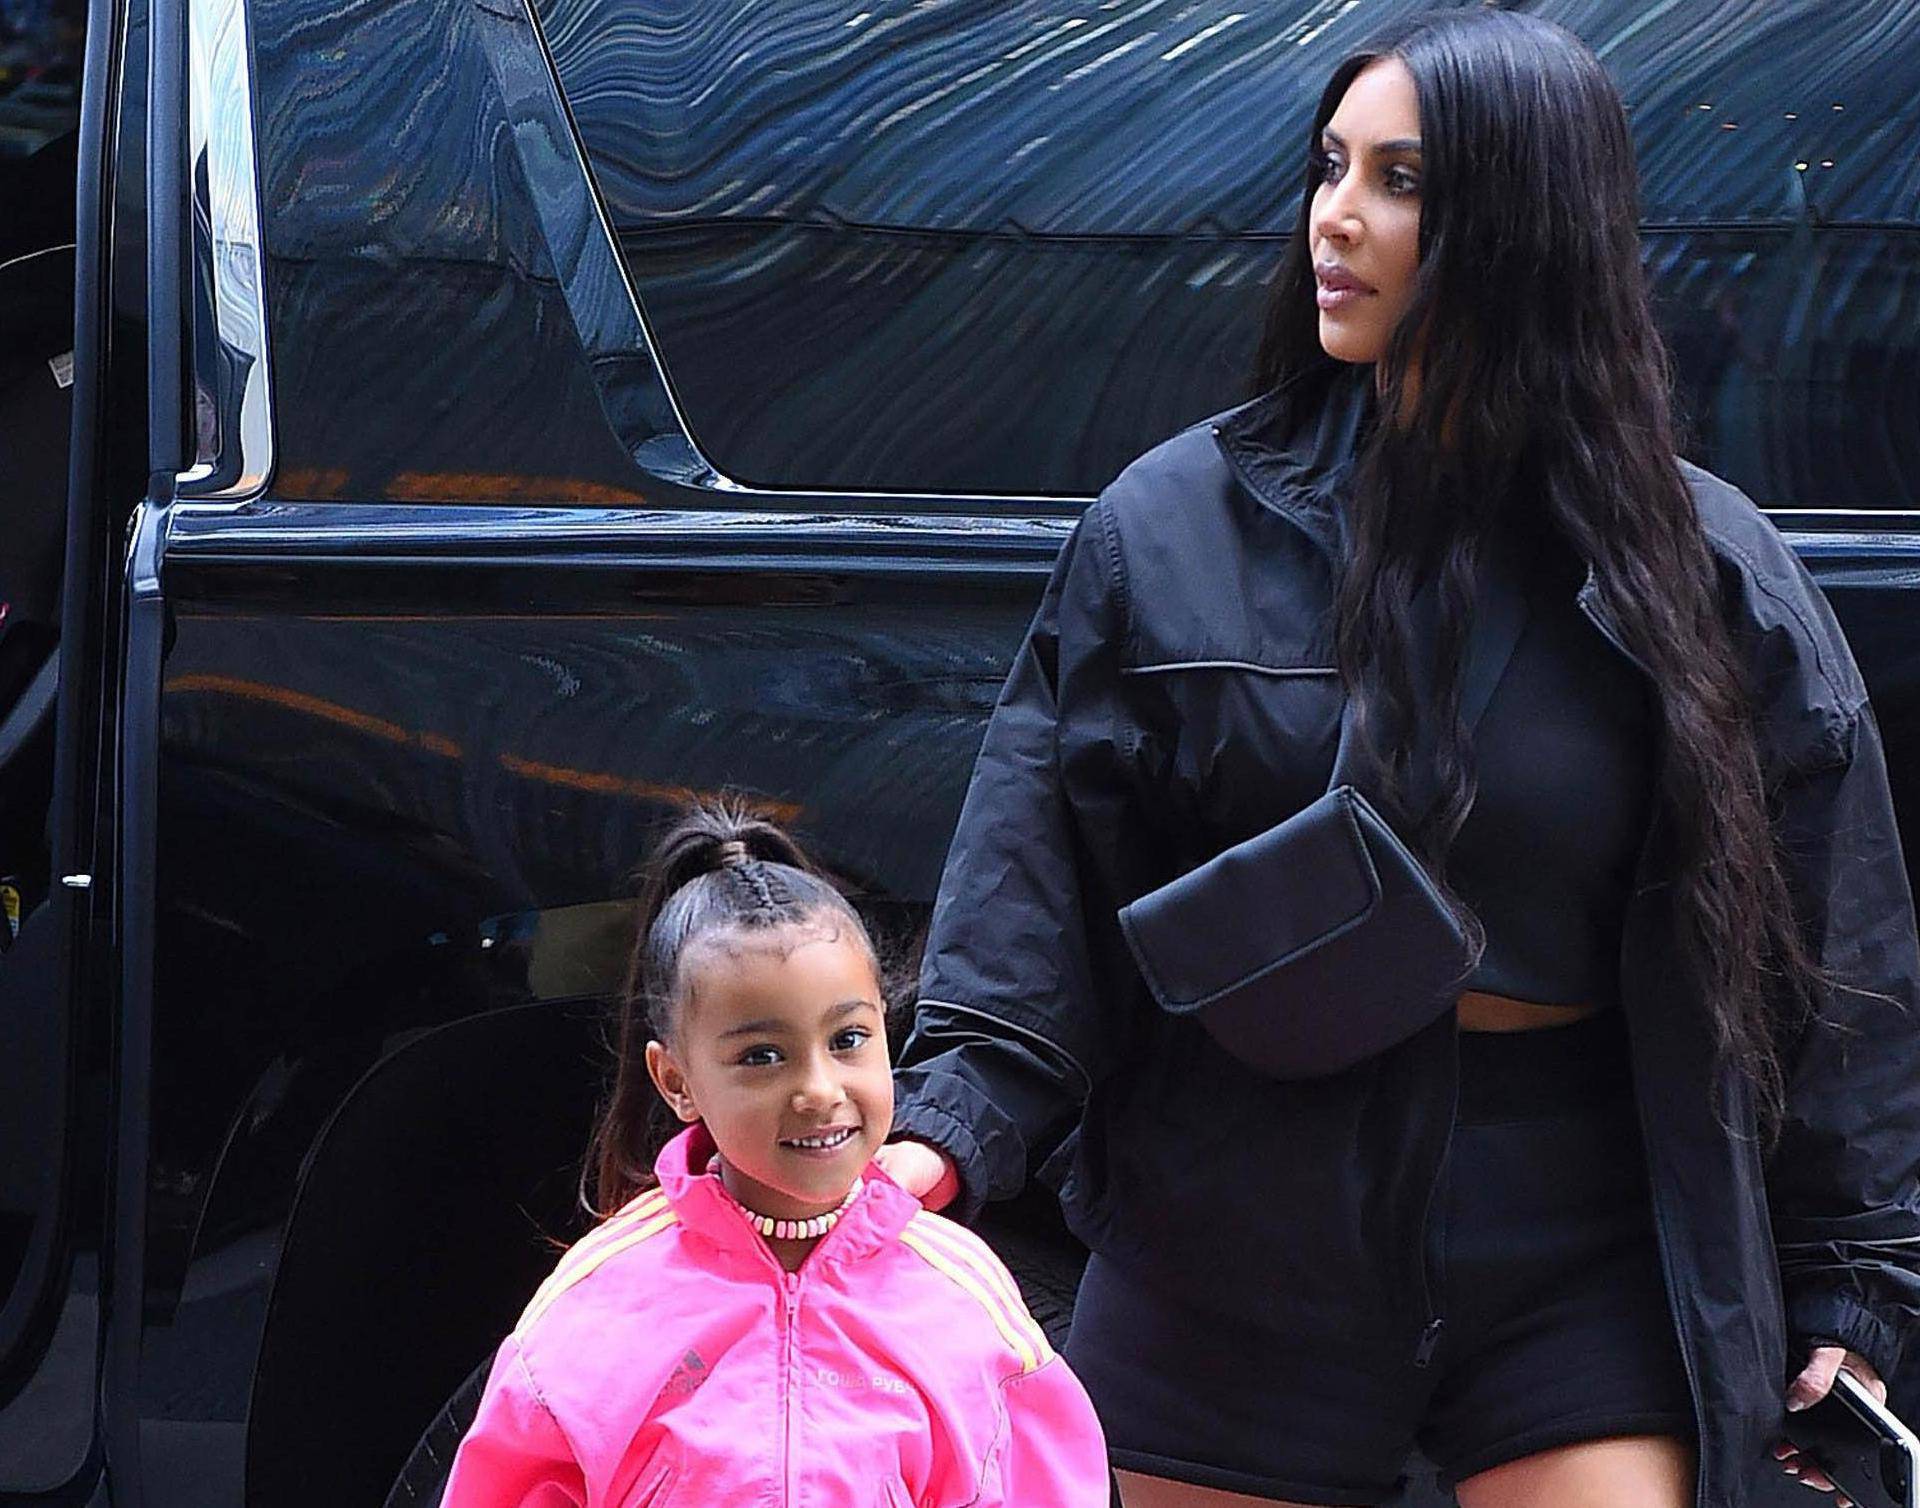 Kim Kardashian and North West is seen in Los Angeles